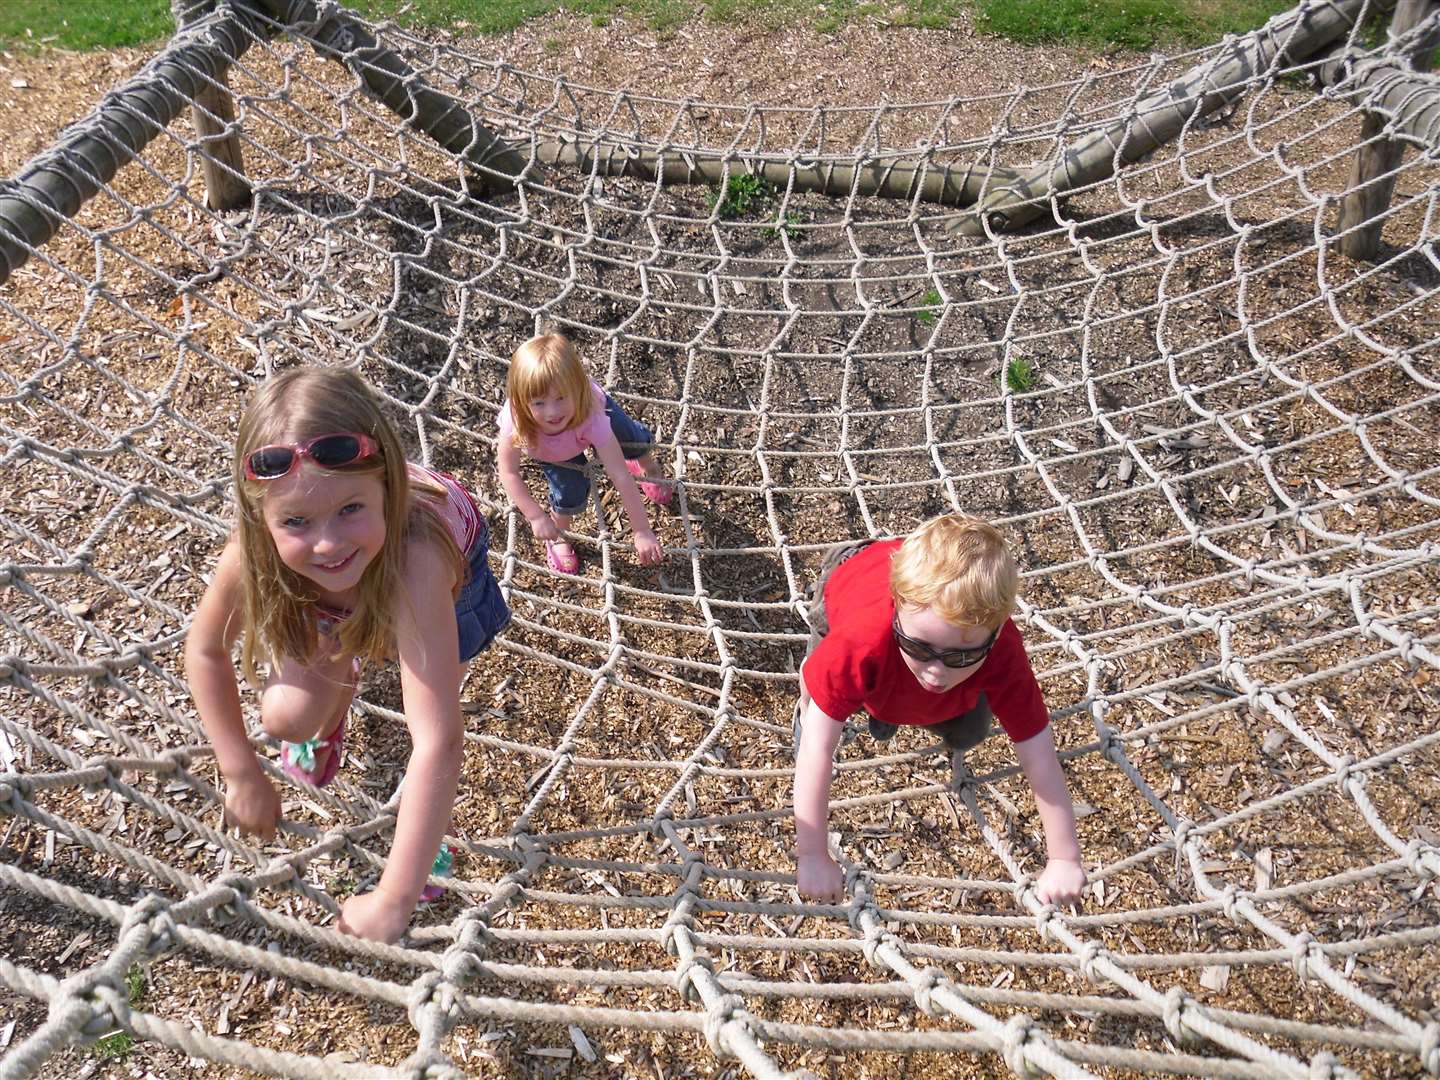 Penshurst Place has revamped its play area